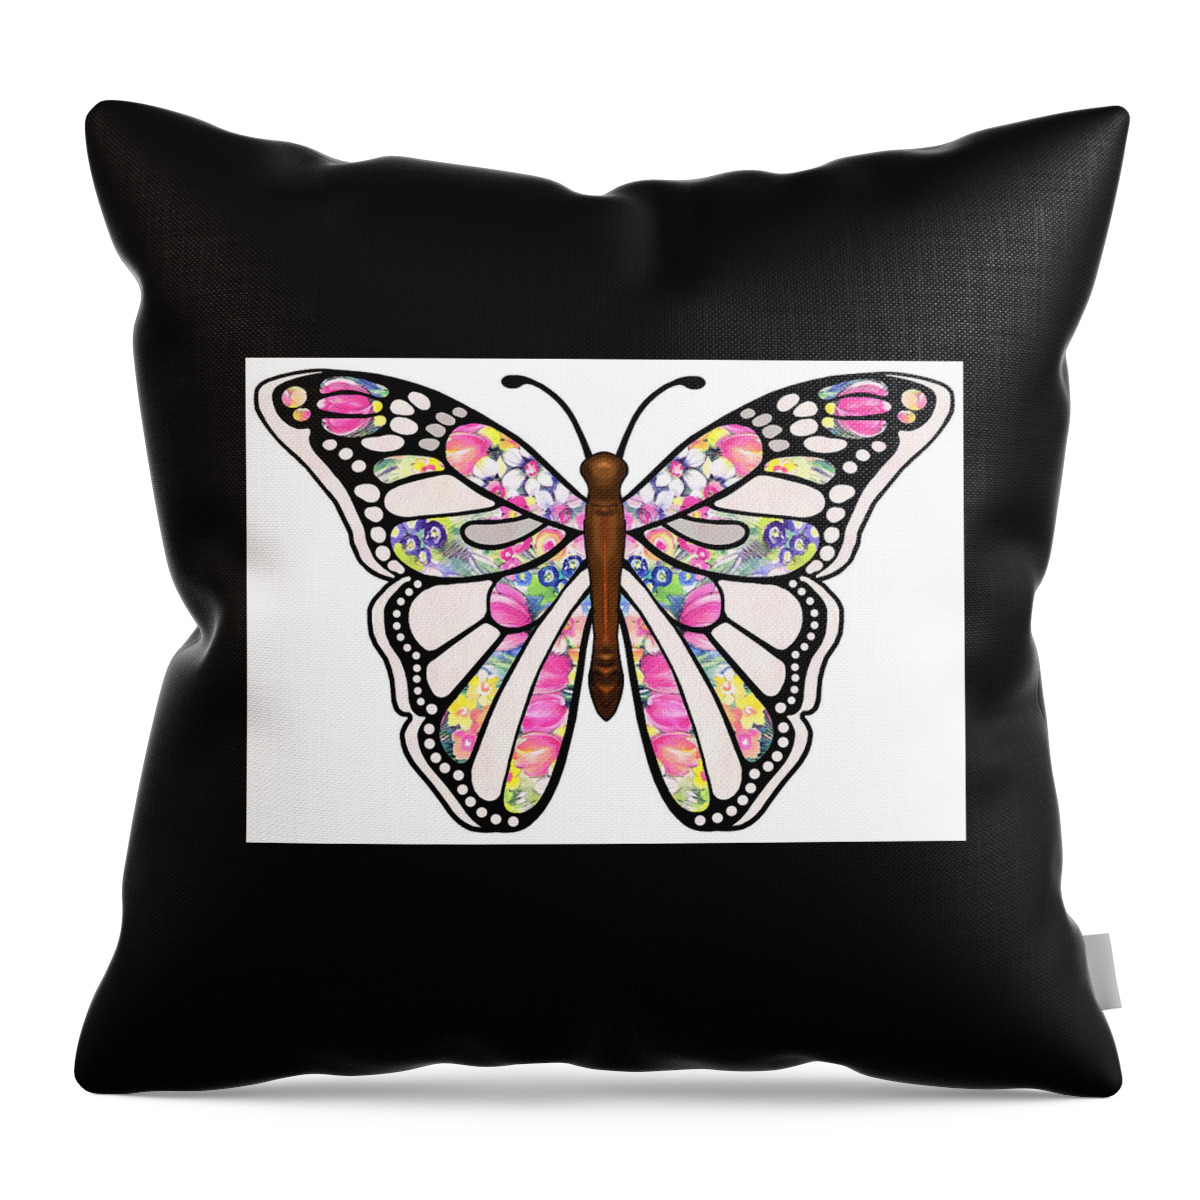 Butterfly Throw Pillow featuring the digital art Butterfly by Super Lovely